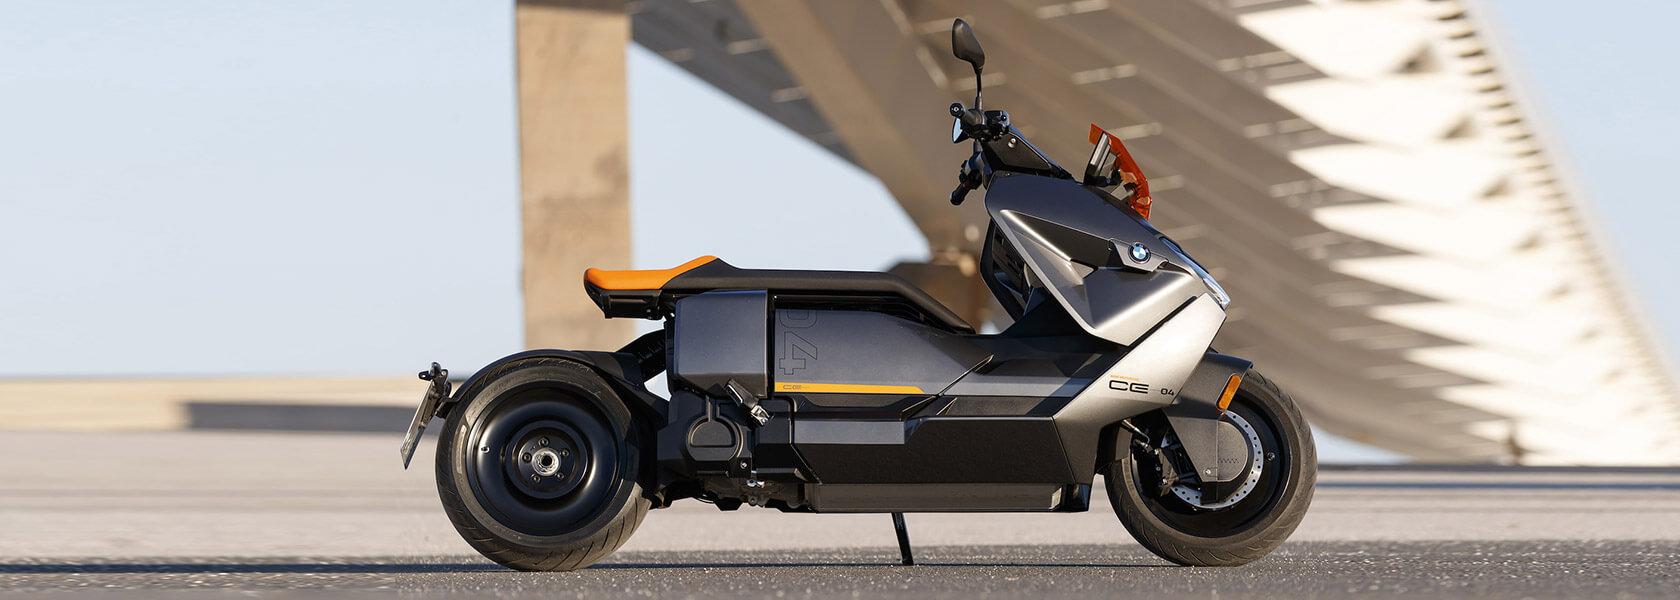 Sacoche pour scooter BMW CE 04